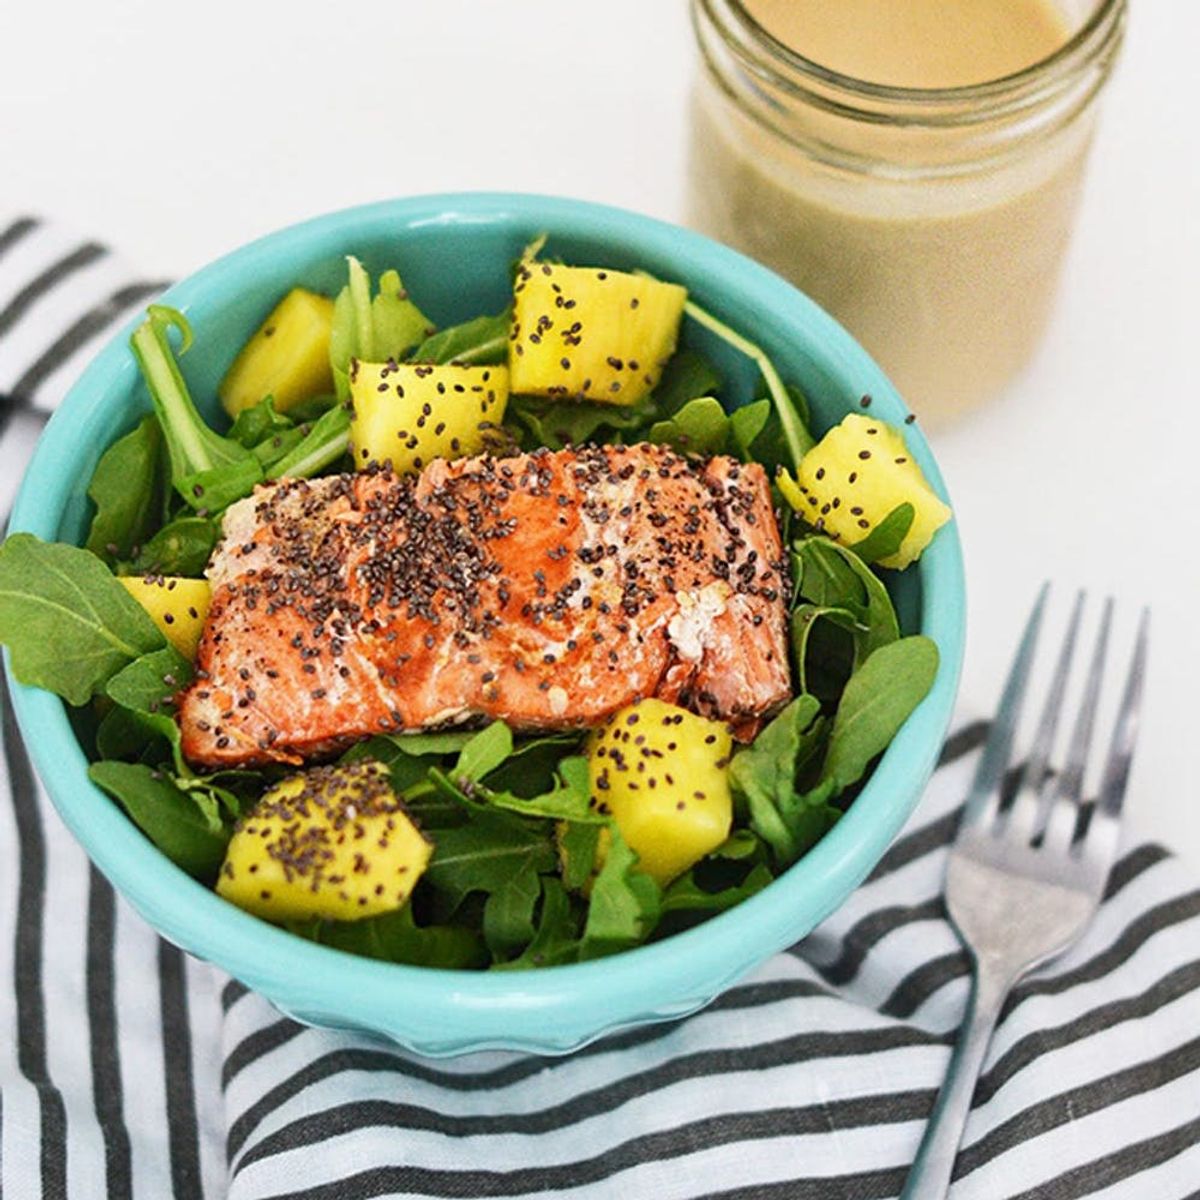 You Will Have Heart Eyes for These Easy Salmon Recipes